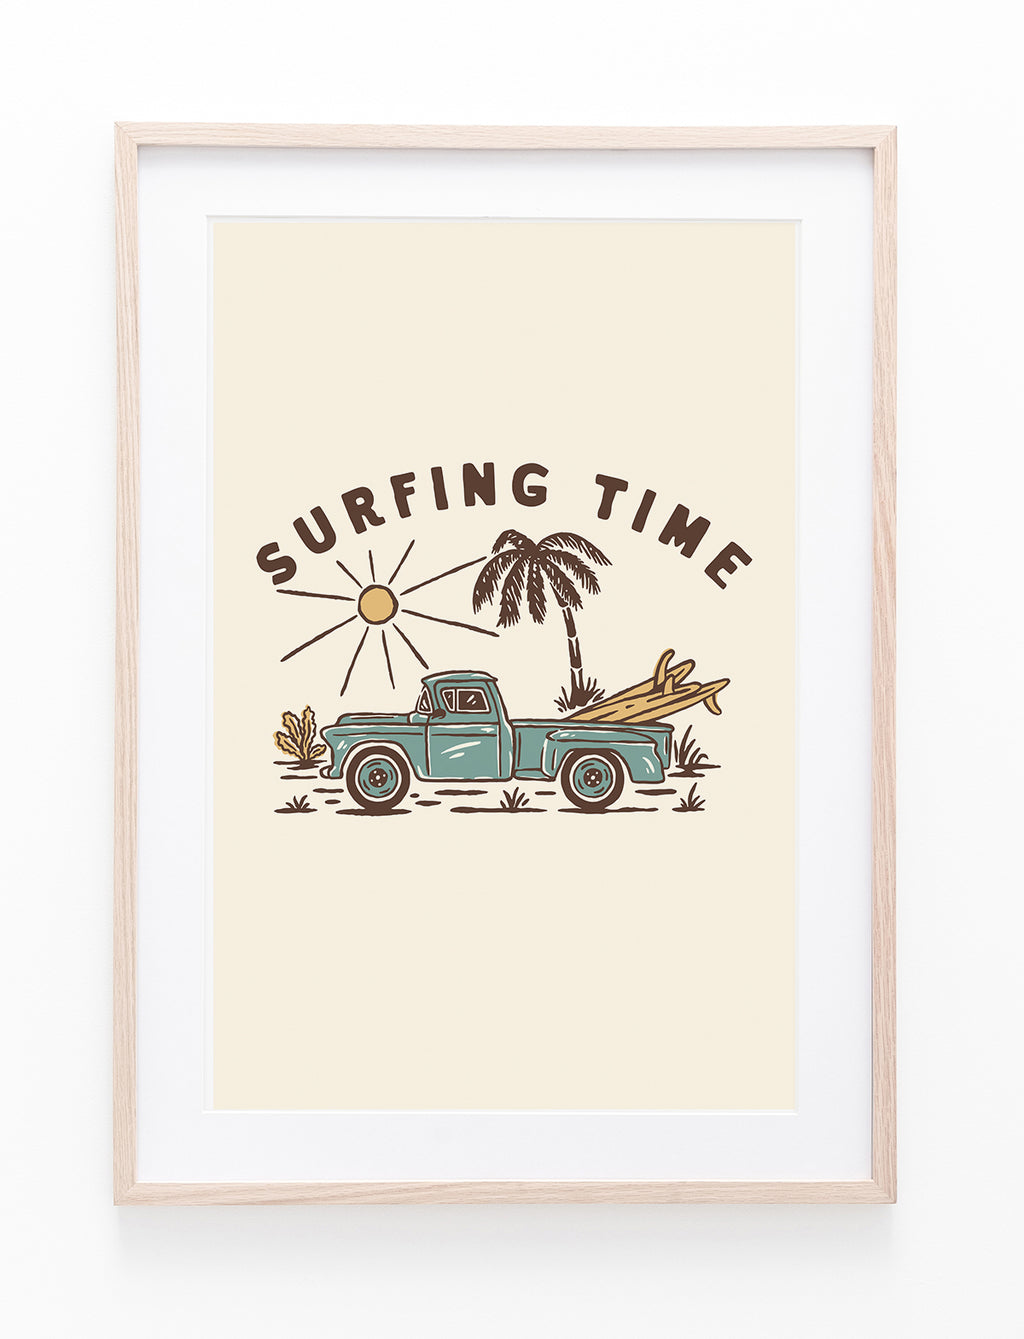 Surfing Time